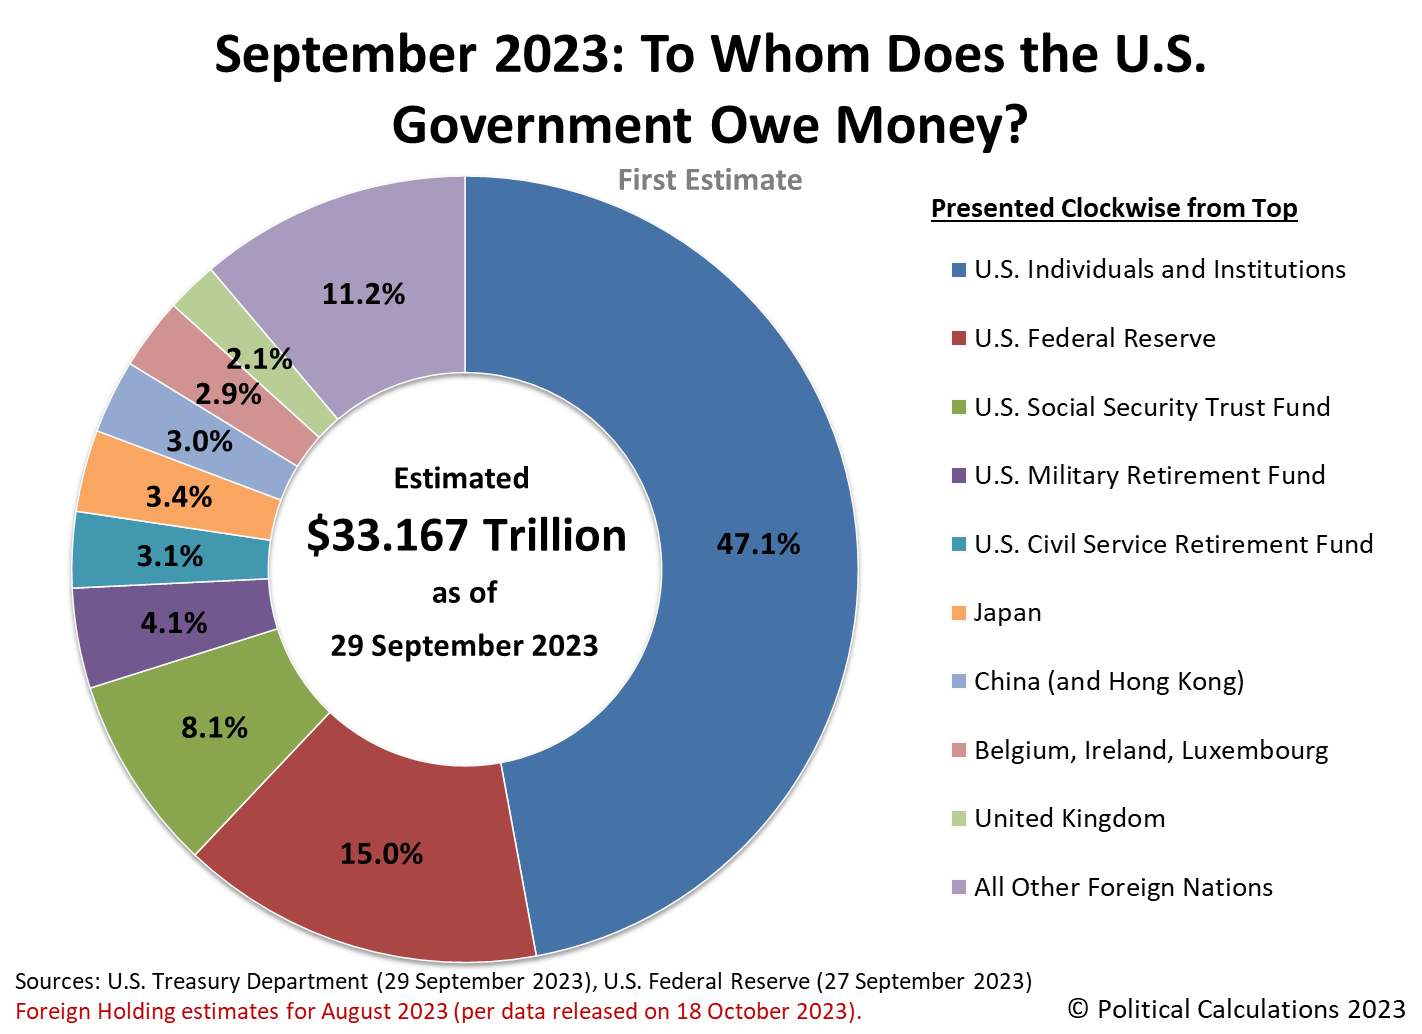 To Whom Does the U.S. Government Owe Money? September 2023 First Estimate